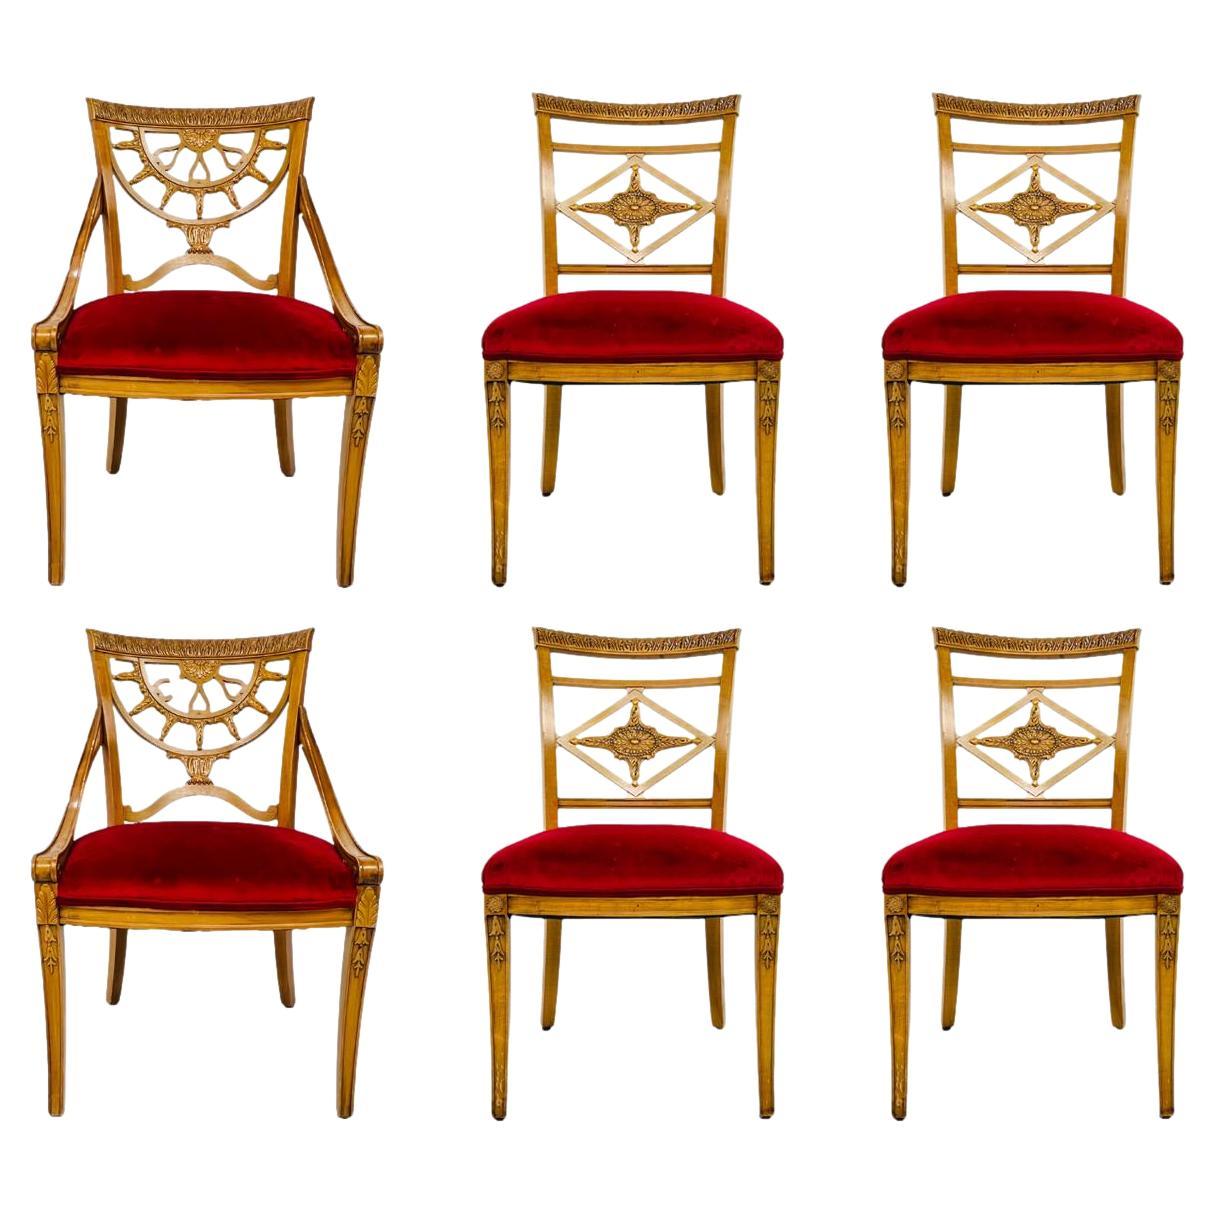 Set of 6 Carved Wood French Neoclassical Dining Chairs